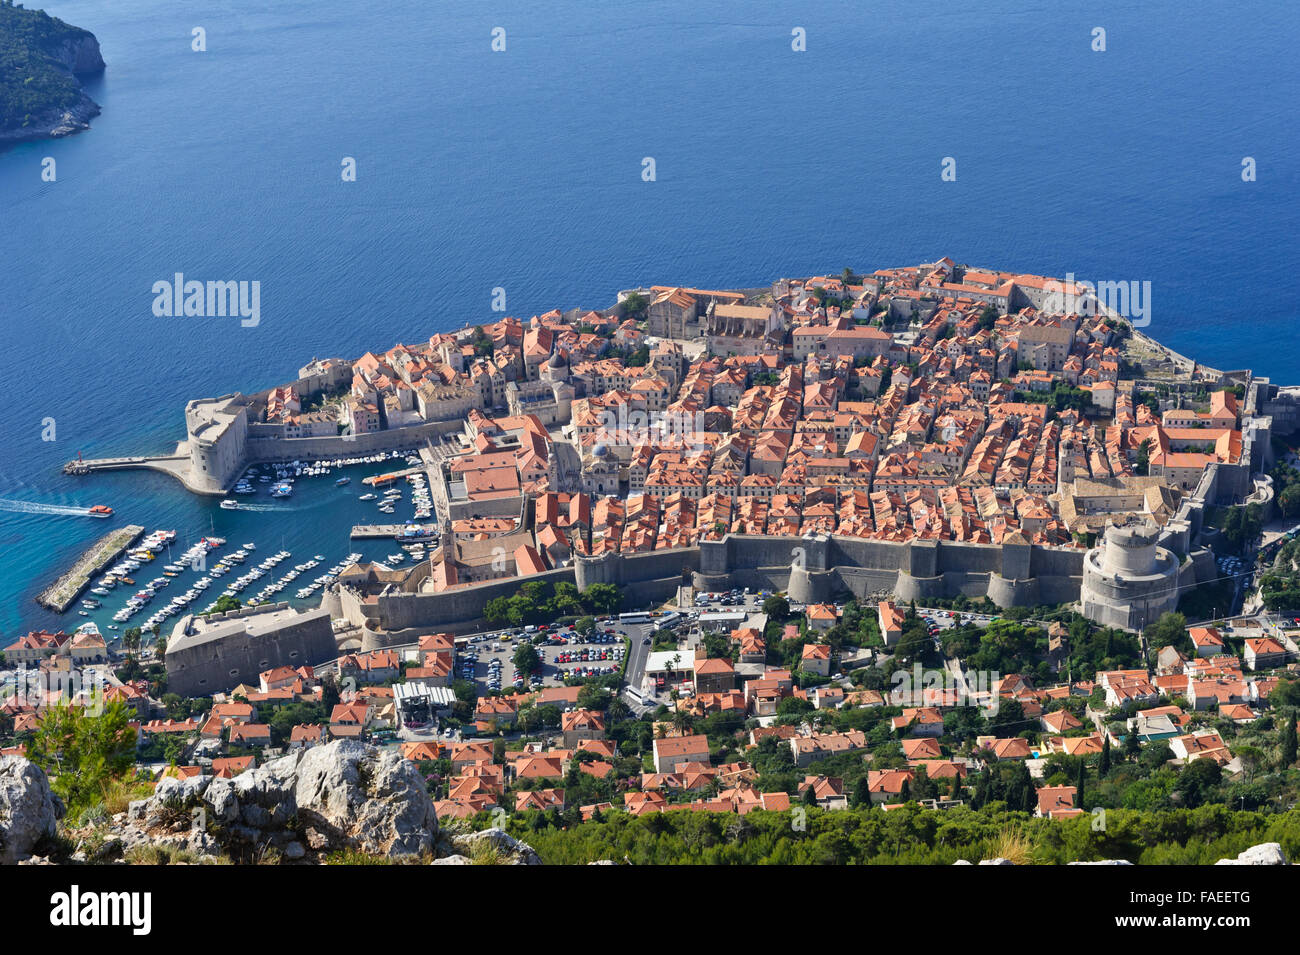 A panoramic view of the medieval town and harbour of Dubrovnik, Croatia. Stock Photo